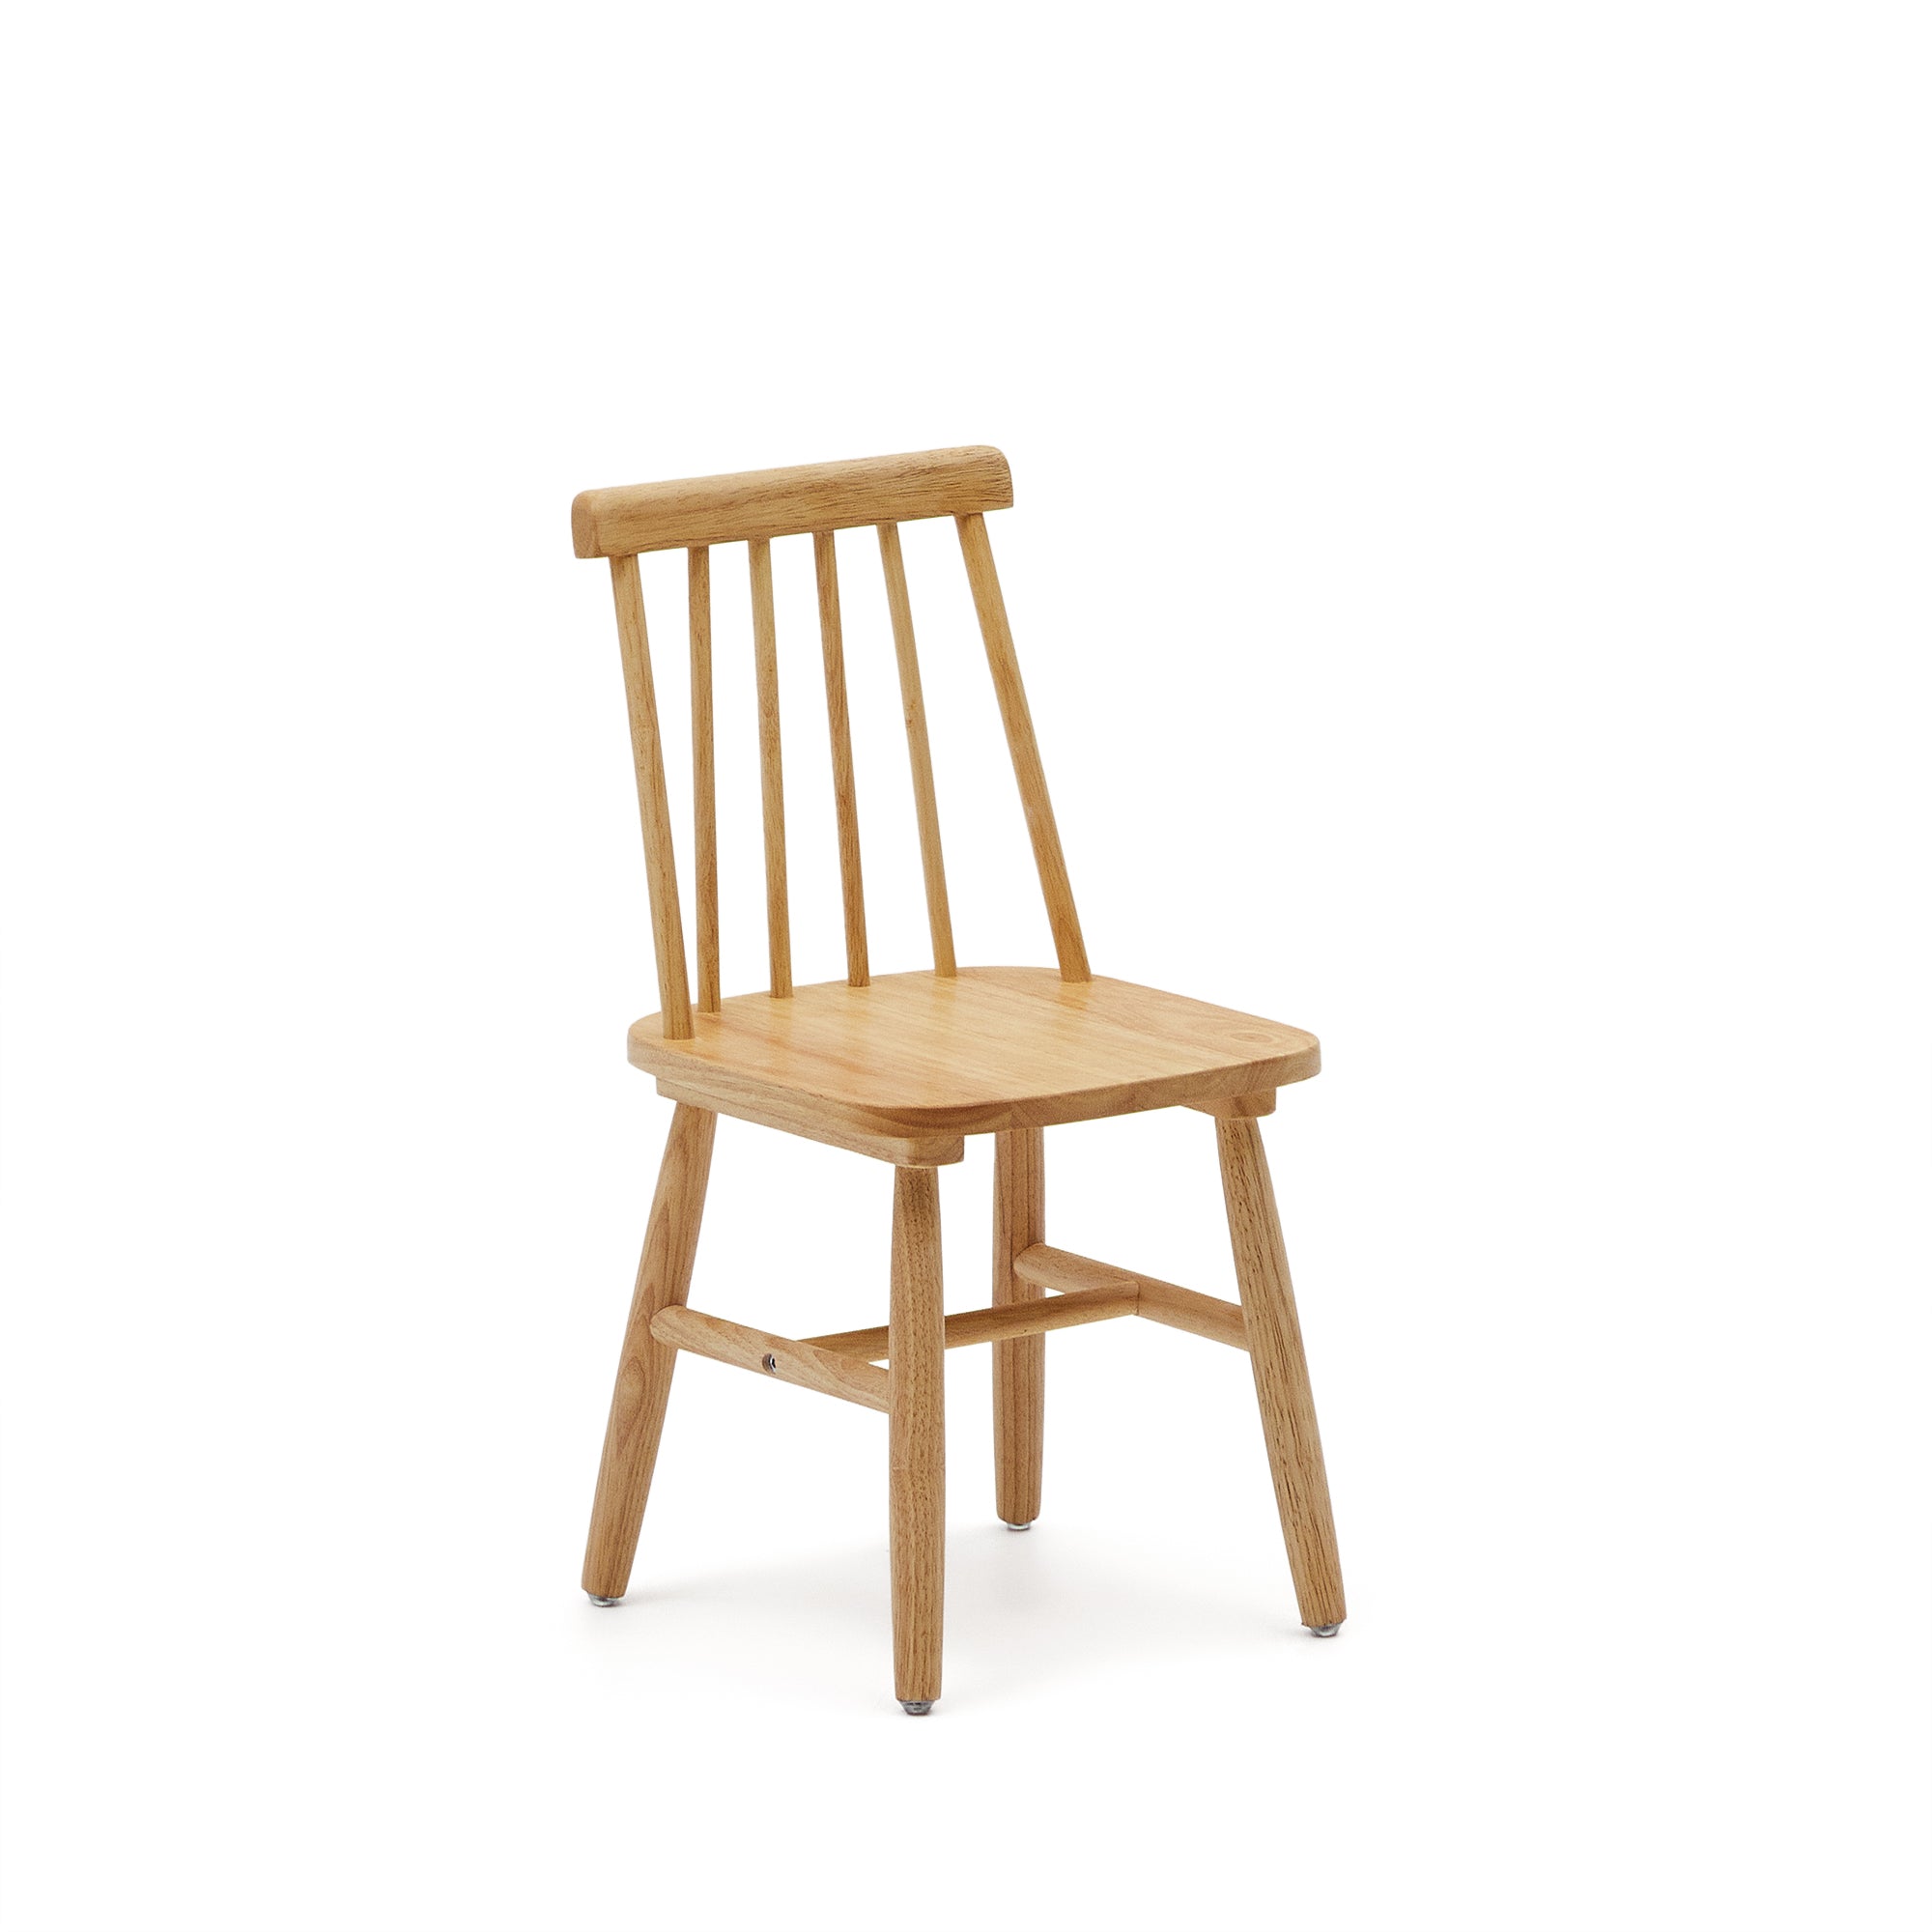 Tressia kids chair in solid rubber wood with natural finish